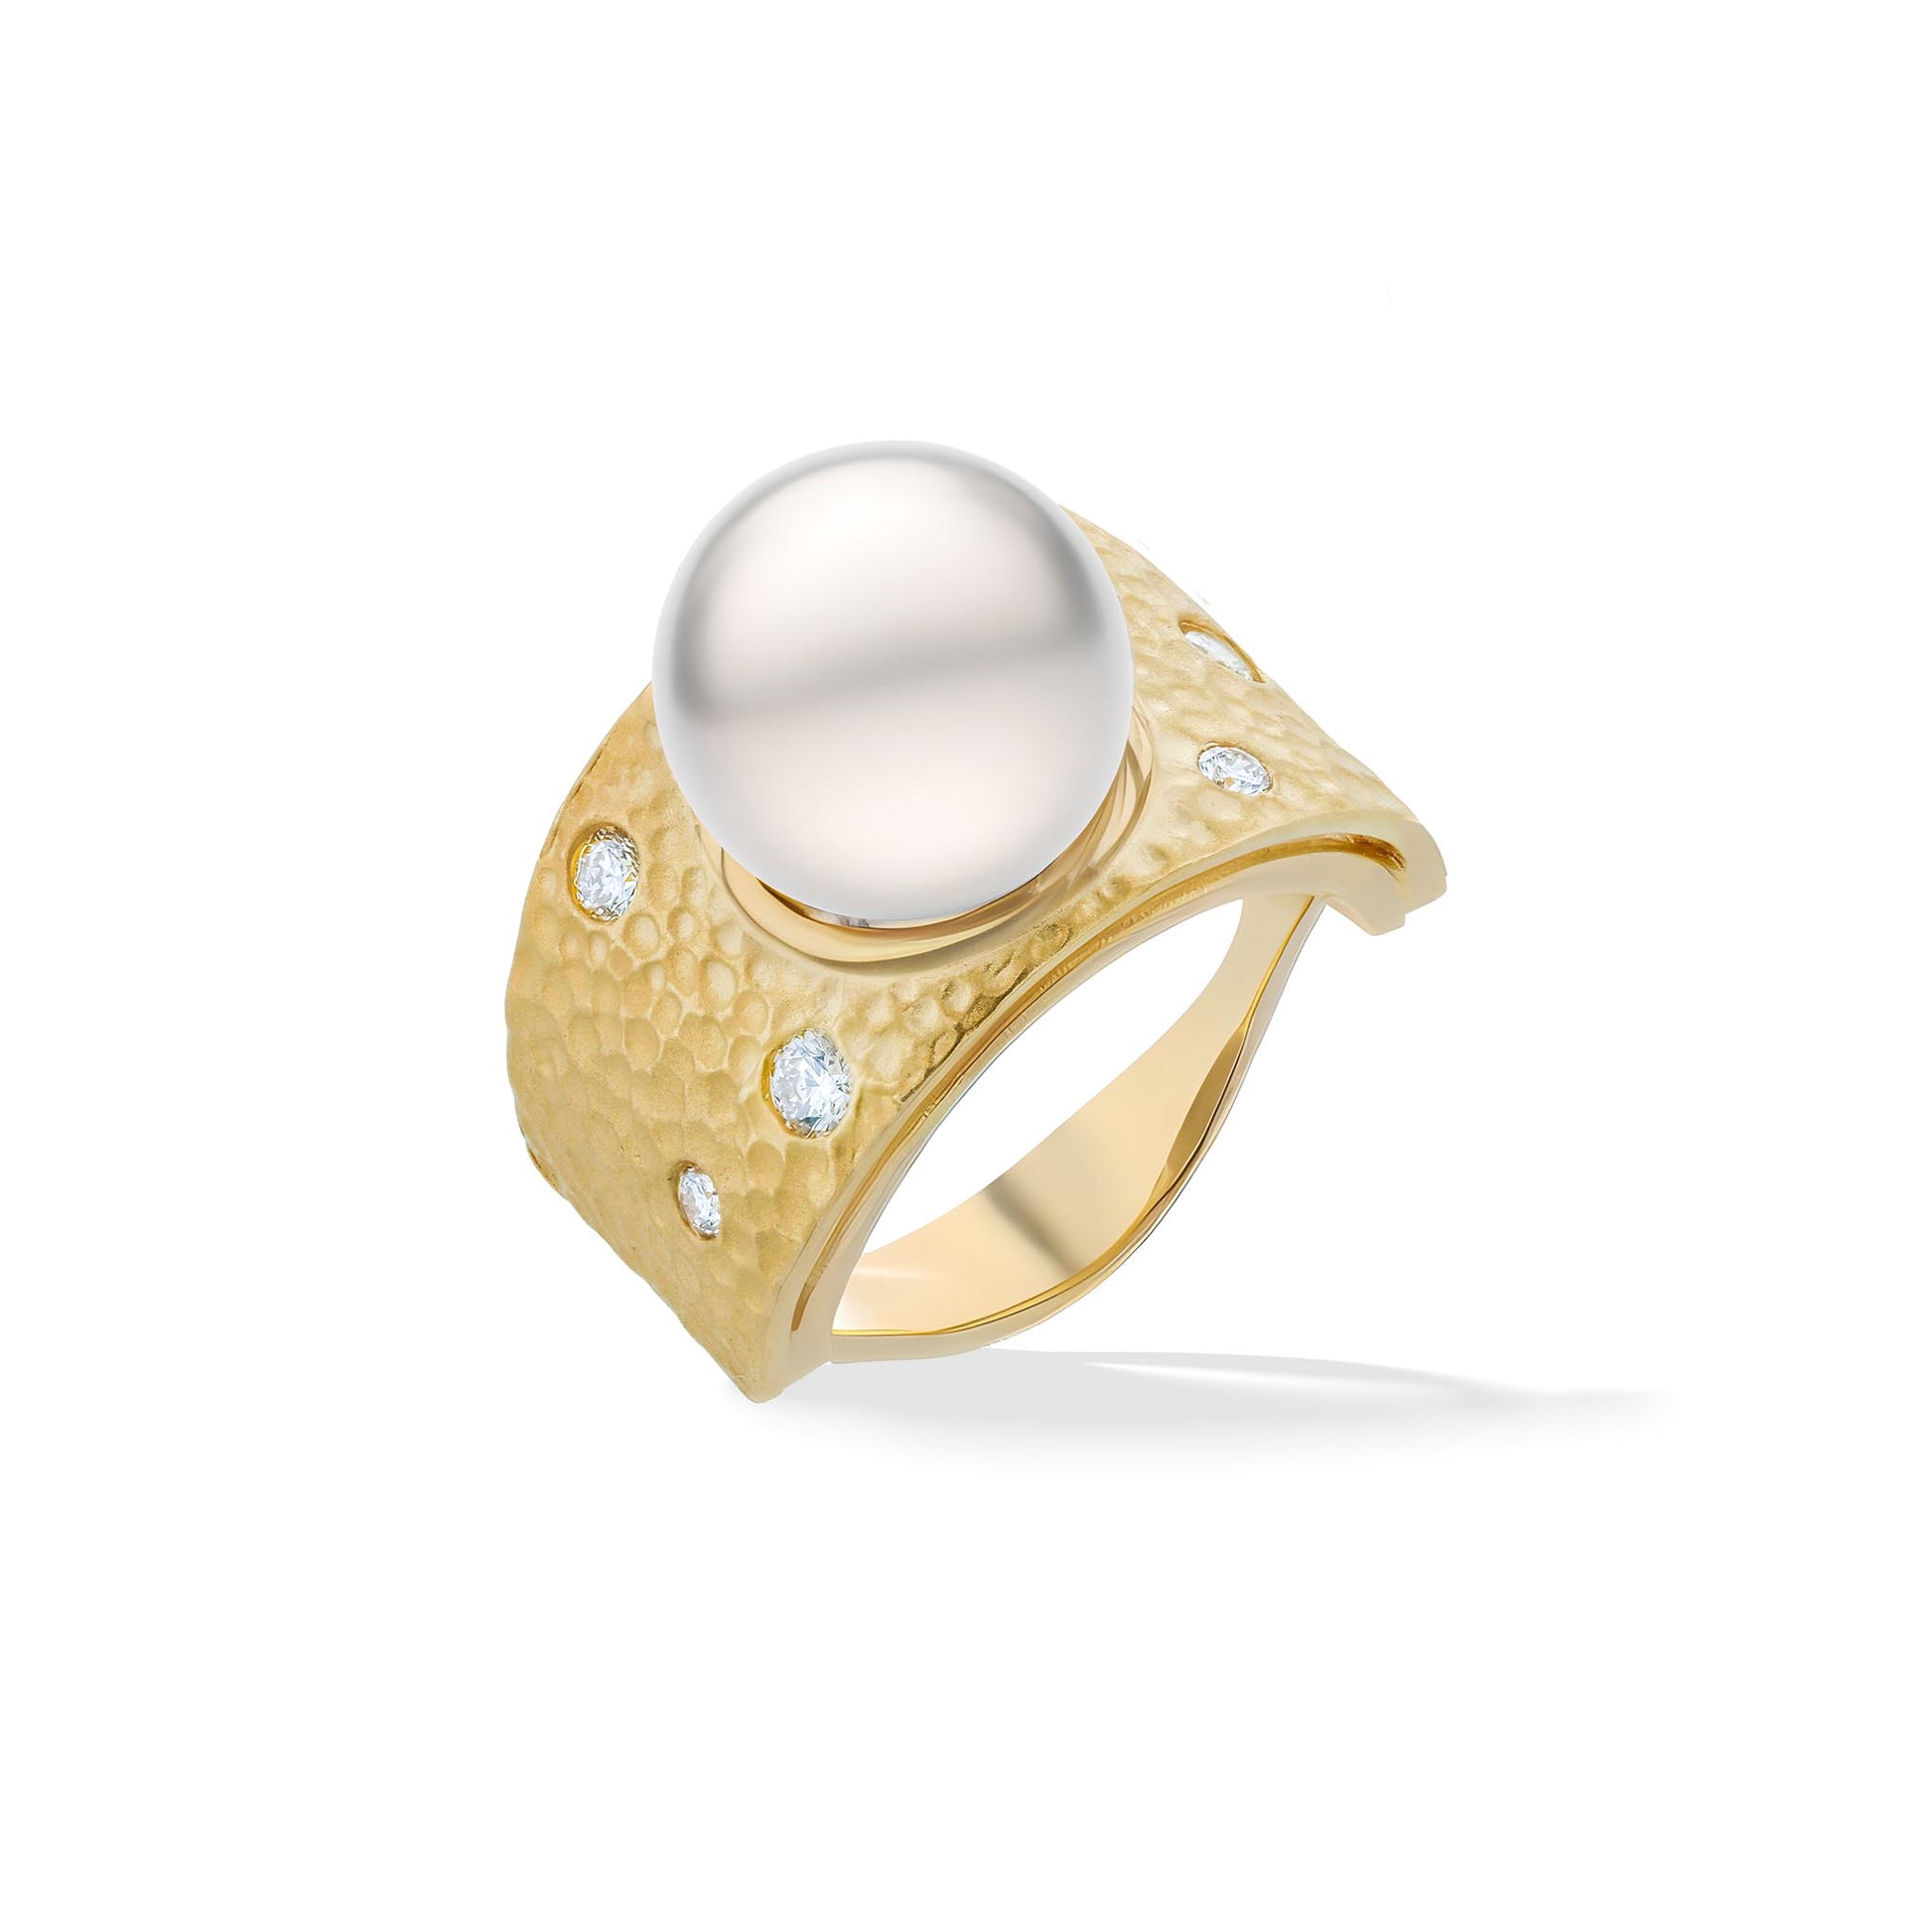 44519 - 14K Yellow Gold - White South Sea Pearl Ring